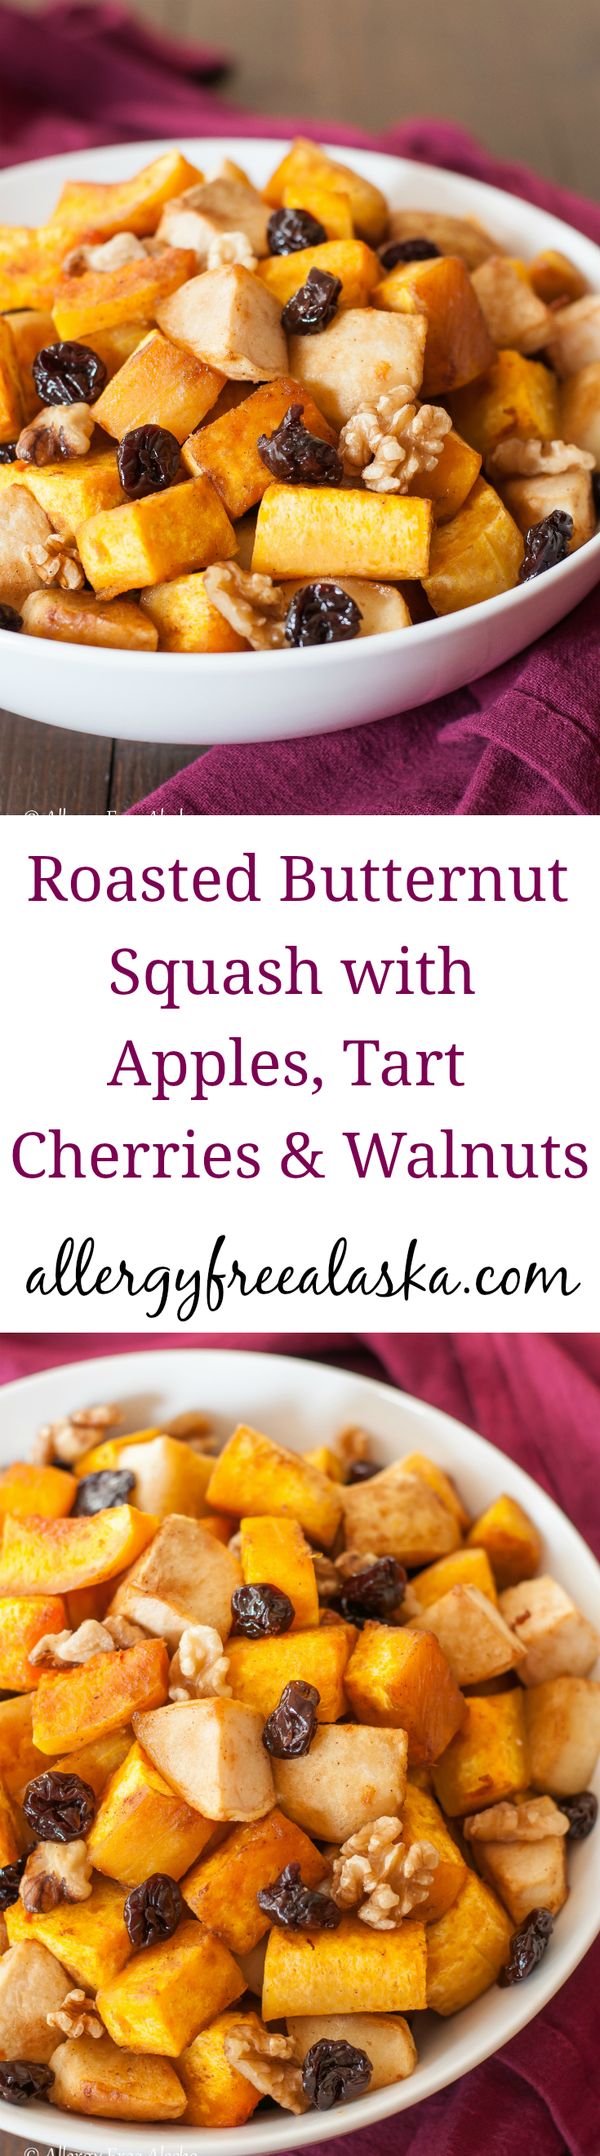 Roasted Butternut Squash with Apples, Tart Cherries and Walnuts